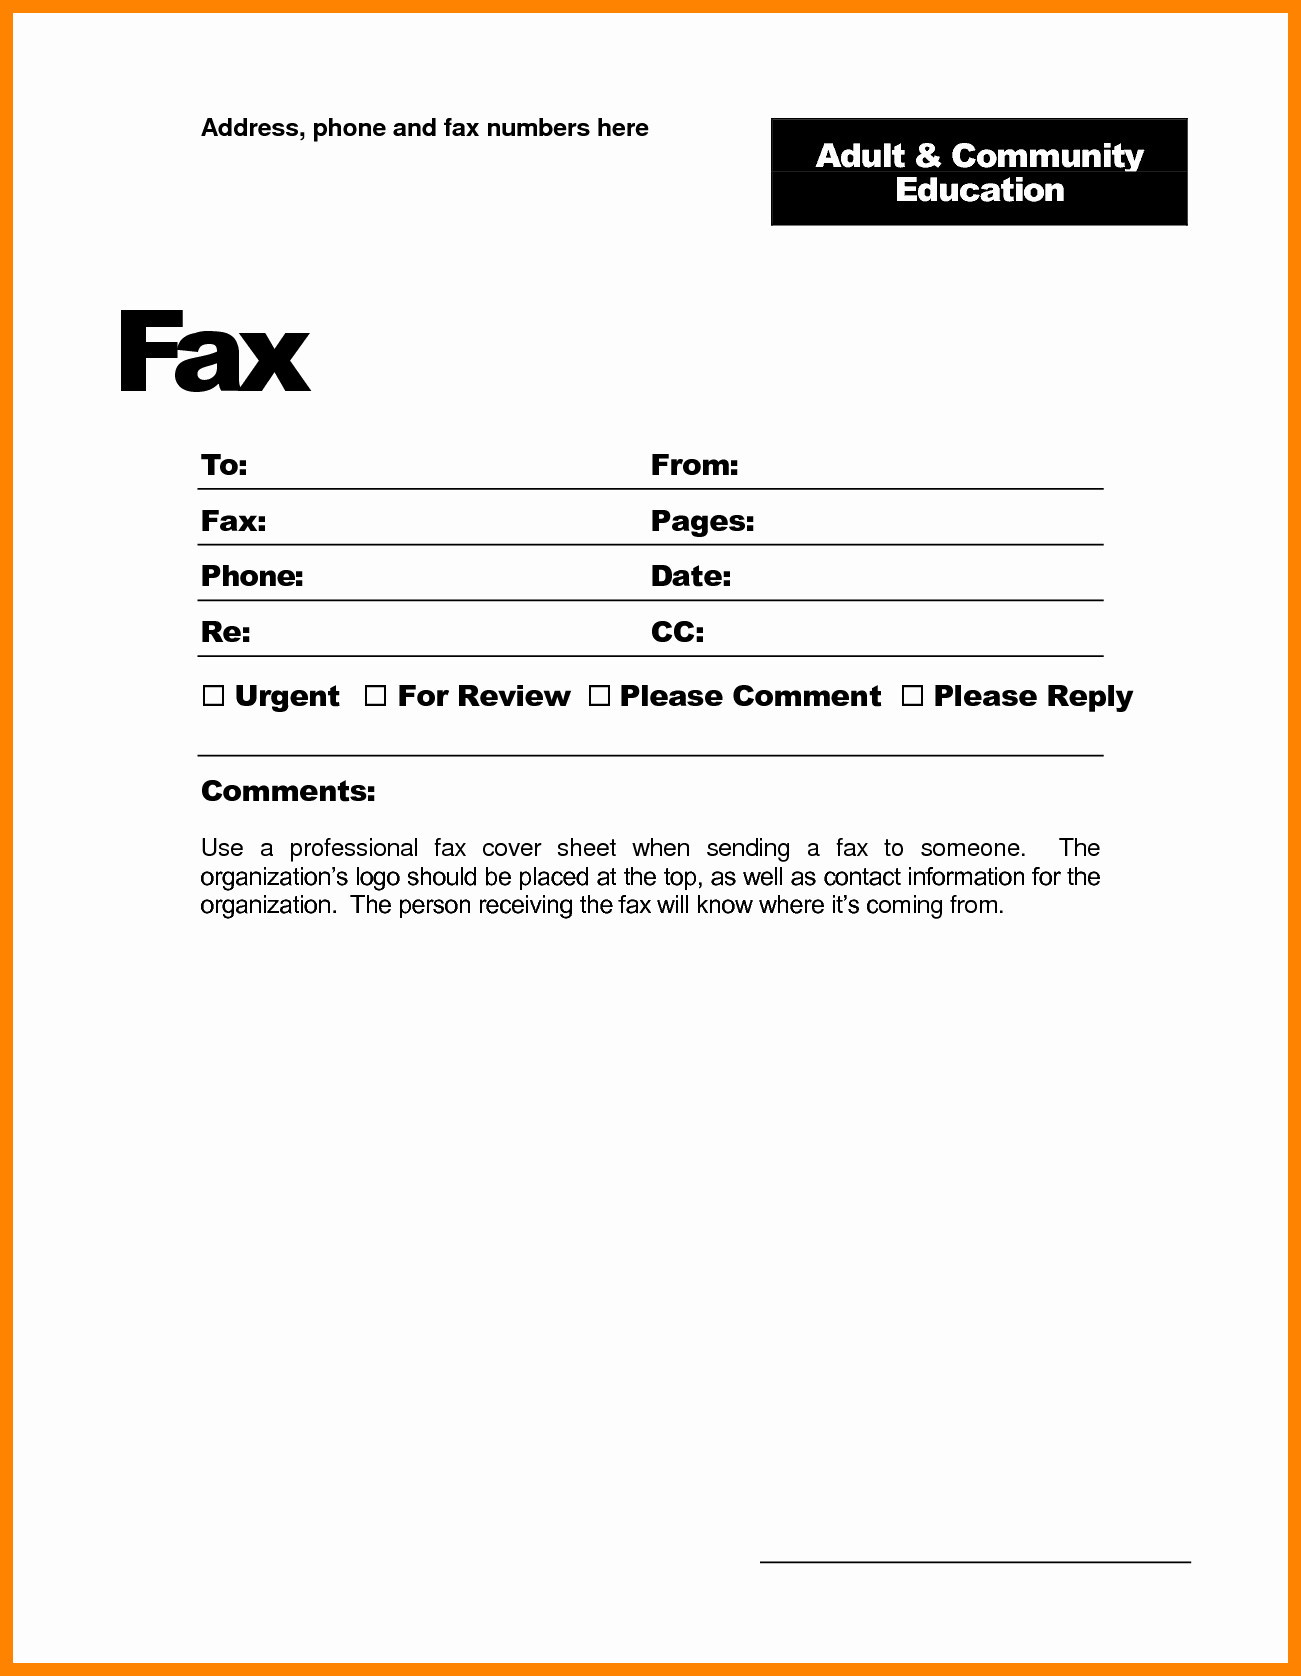 Word Template Fax Cover Sheet Best Of Fax Cover Template Word Portablegasgrillweber